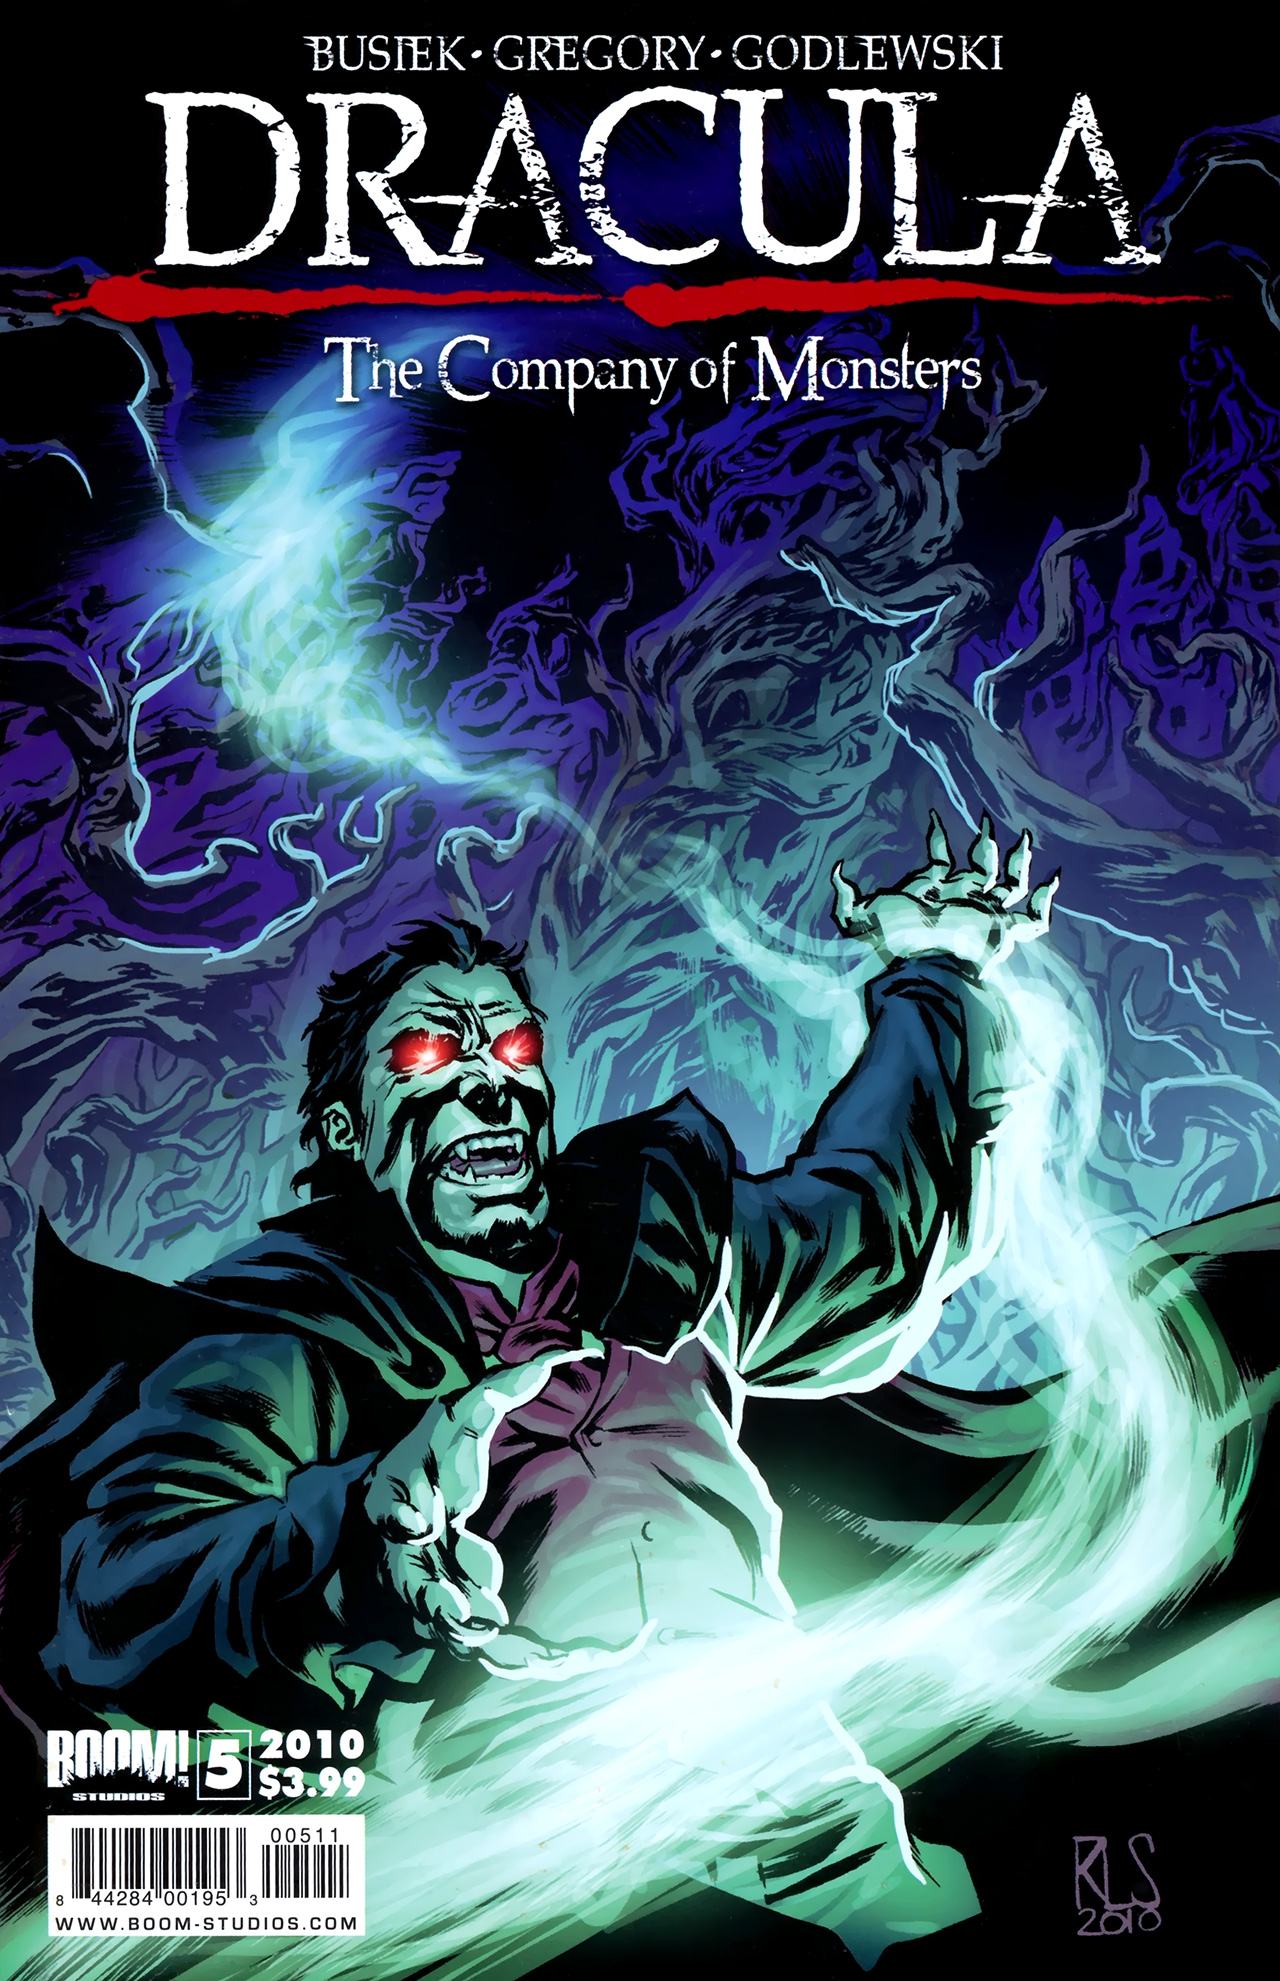 Dracula: The Company of Monsters #5